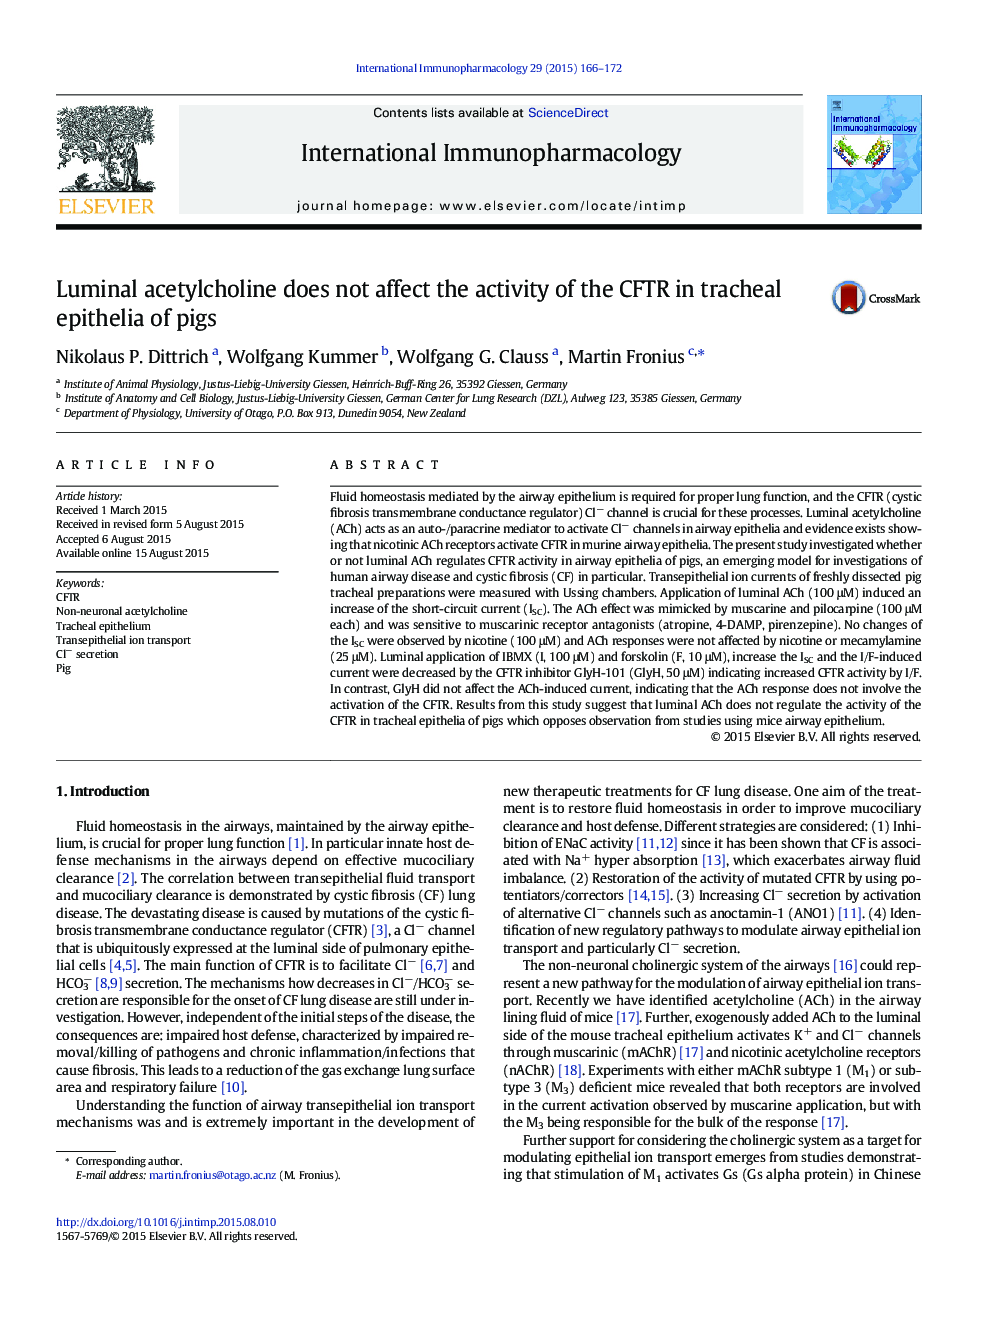 Luminal acetylcholine does not affect the activity of the CFTR in tracheal epithelia of pigs